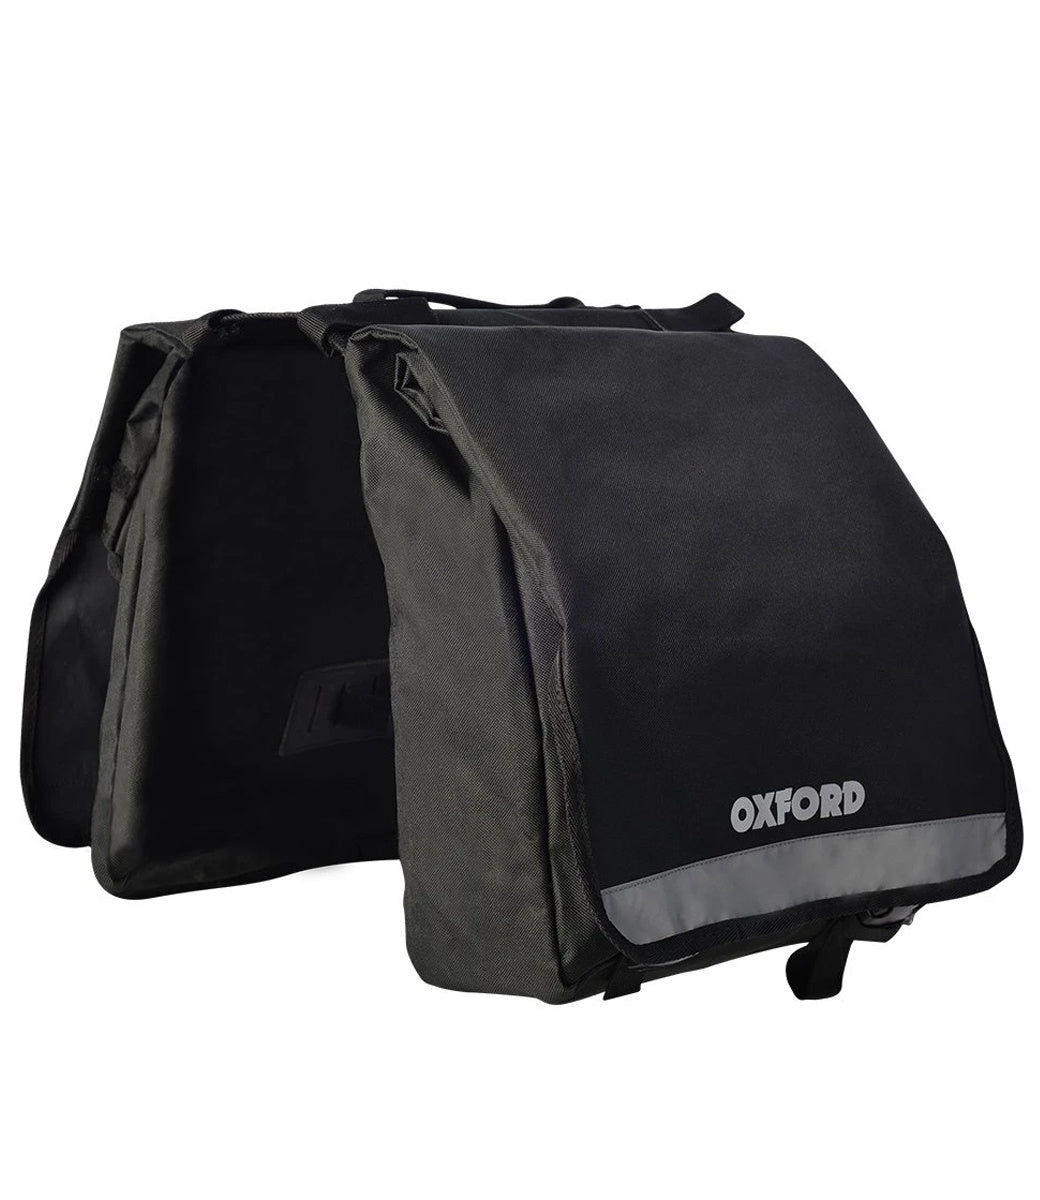 OXFORD C20 DOUBLE BAGS